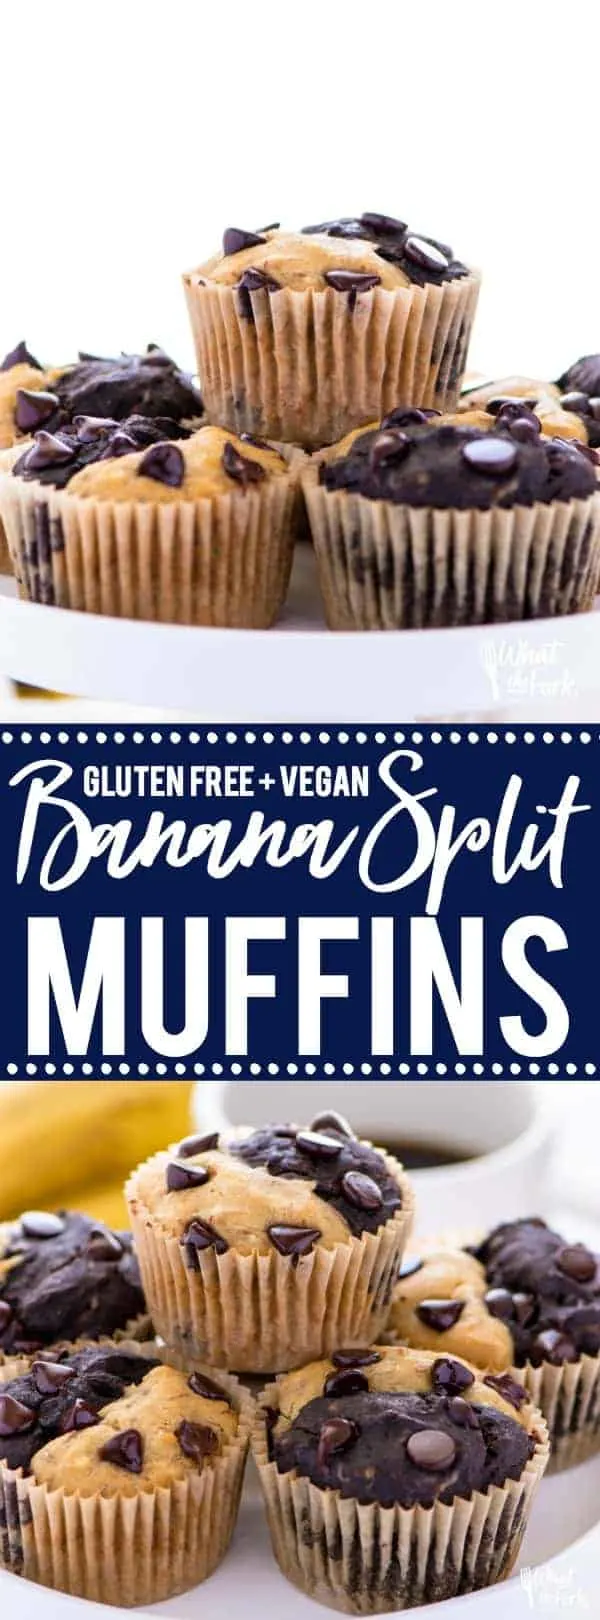 Gluten free vegan banana split muffins are a great way to use up old bananas, especially if you want to try something different from banana bread or banana muffins. This muffin recipe is easy to make, freeze well, and are great for breakfast on busy mornings! @whattheforkblog | whattheforkfoodblog.com | |vegan breakfast recipes | gluten free recipes | easy breakfast recipes | homemade muffins | chocolate muffin recipes | recipes with bananas | #breakfast #muffins #glutenfree #vegan #easyrecipes